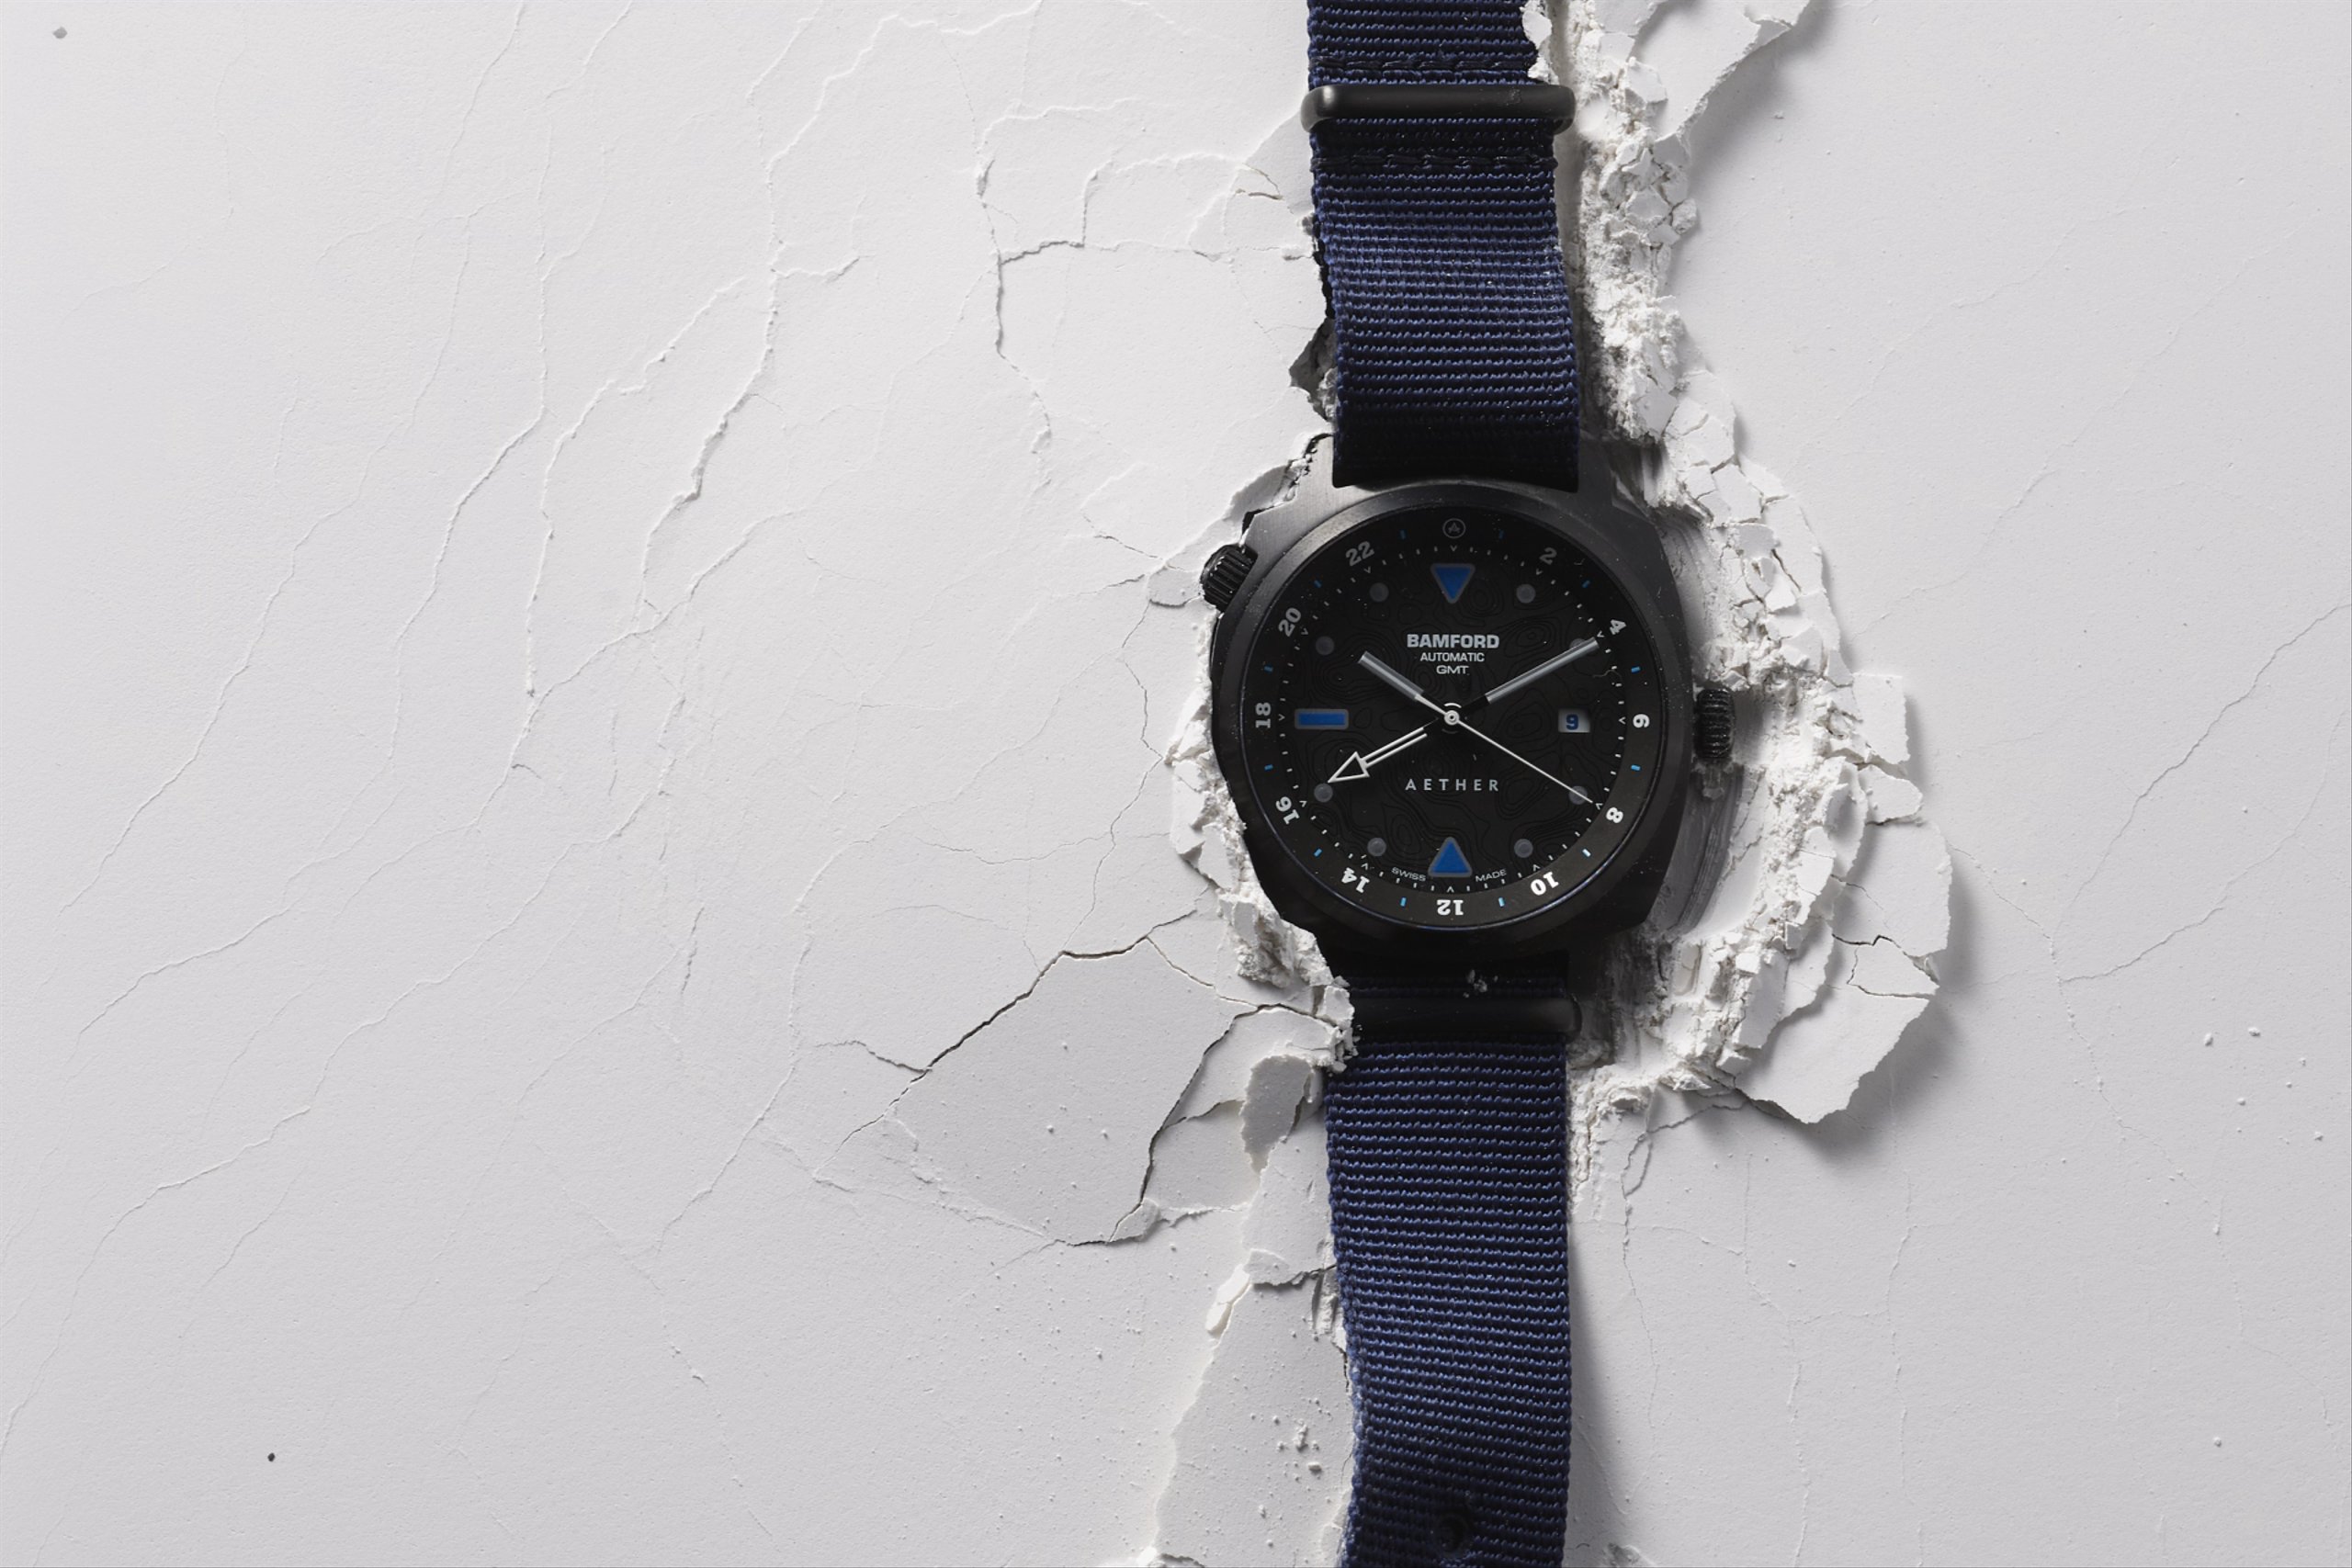 Video of Bamford watch sitting on cracked white surface with seconds hand looping